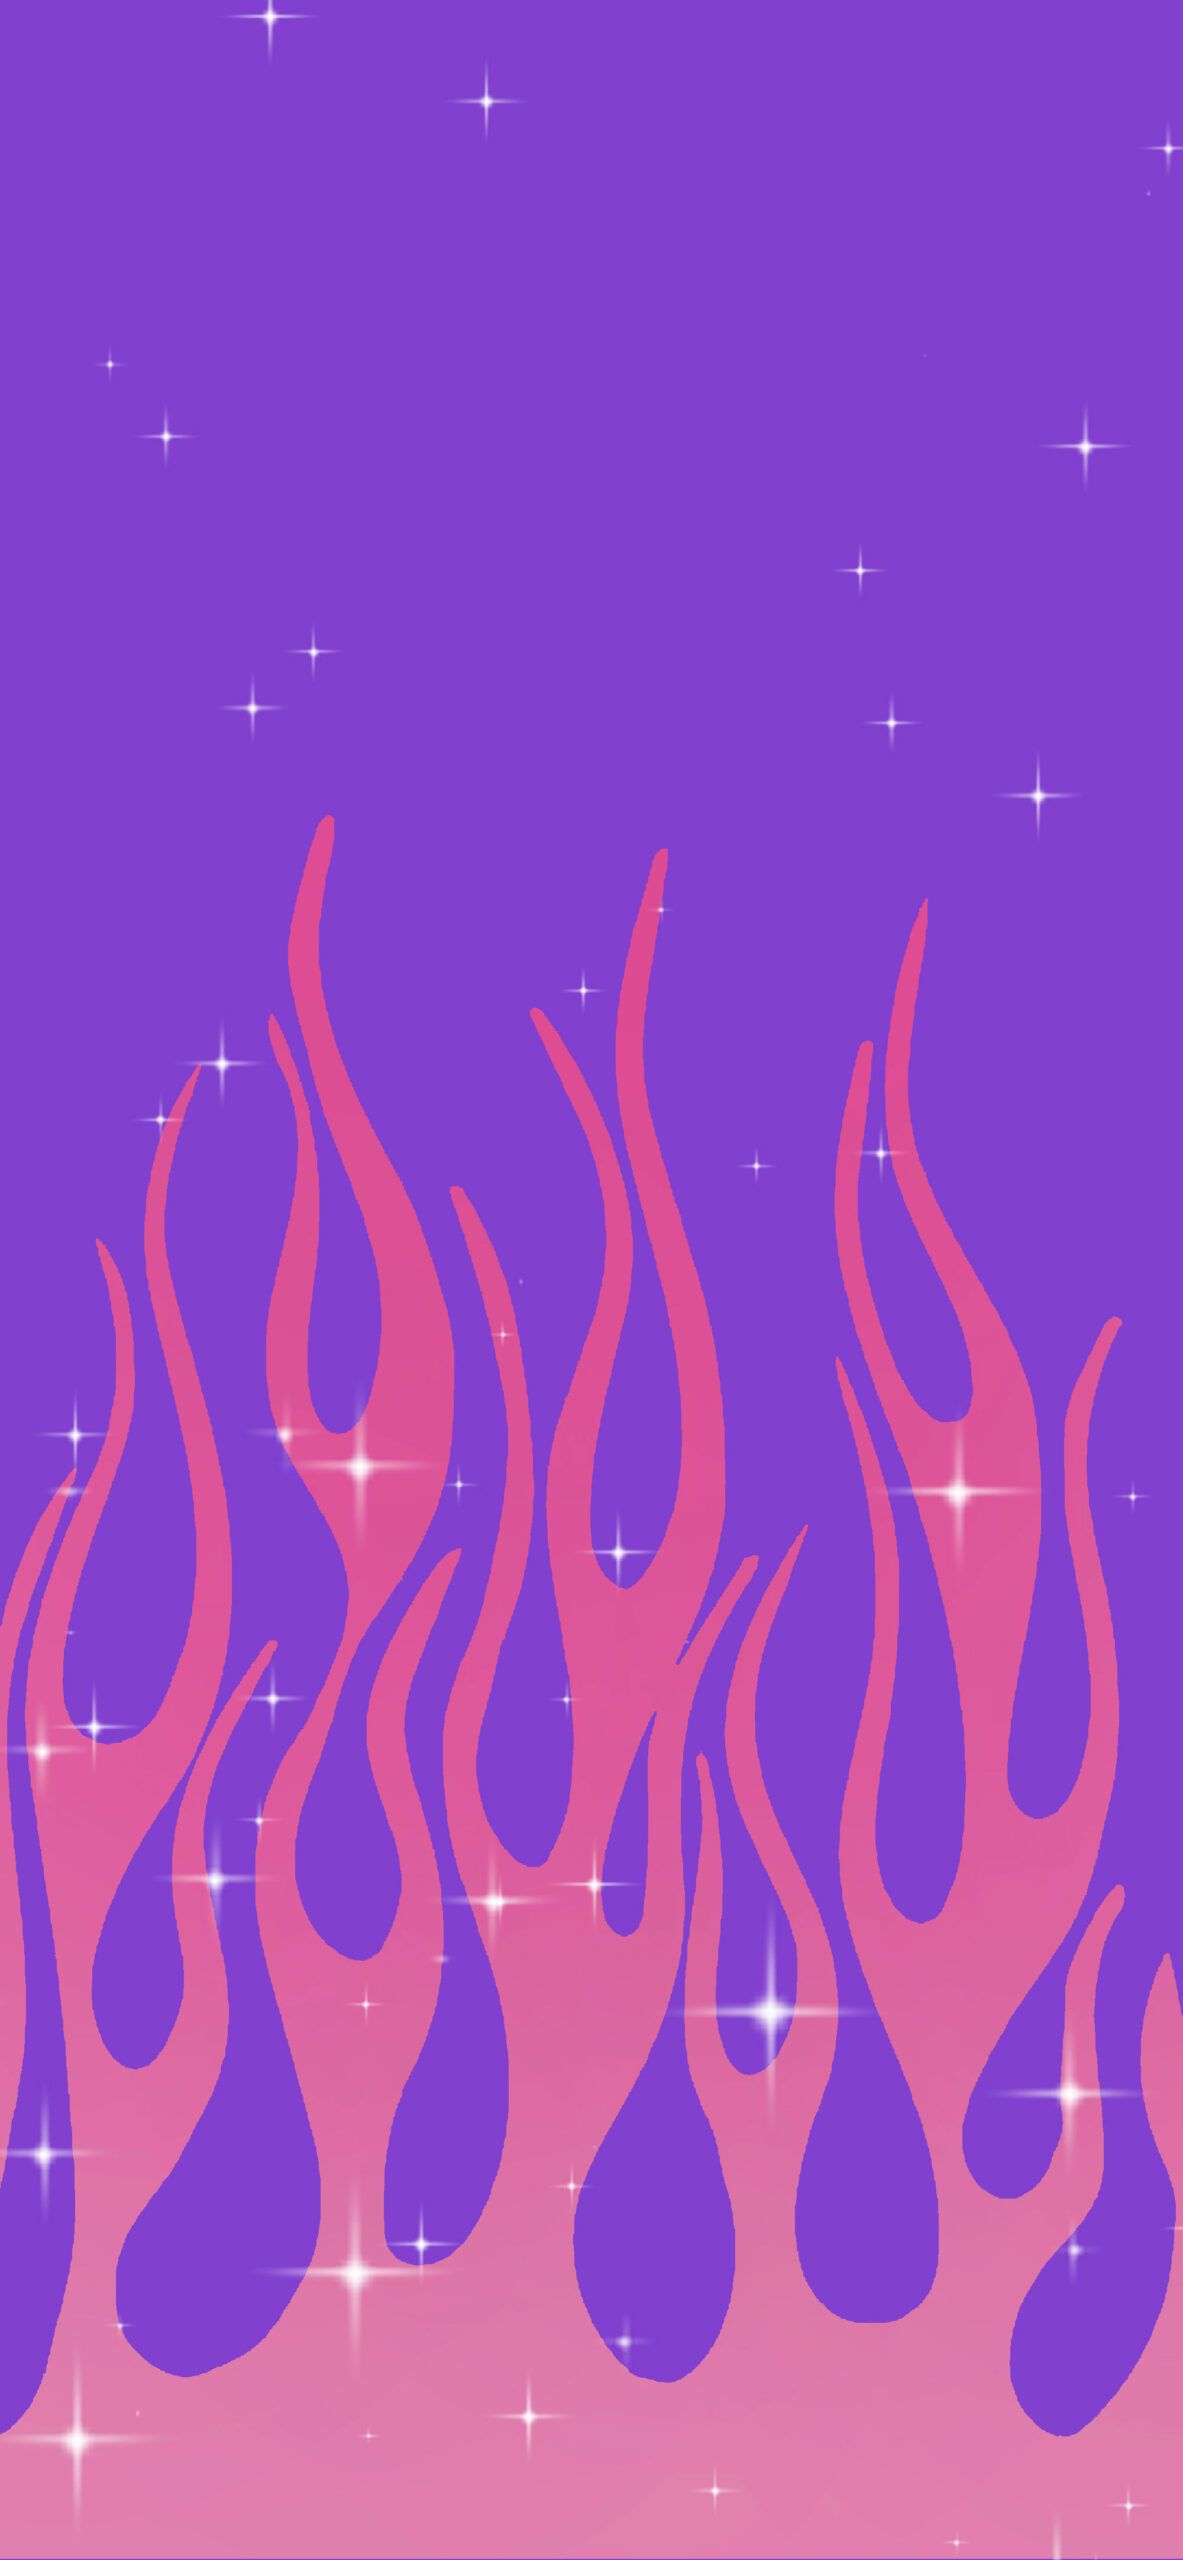 A purple background with flames and stars - Fire, flames